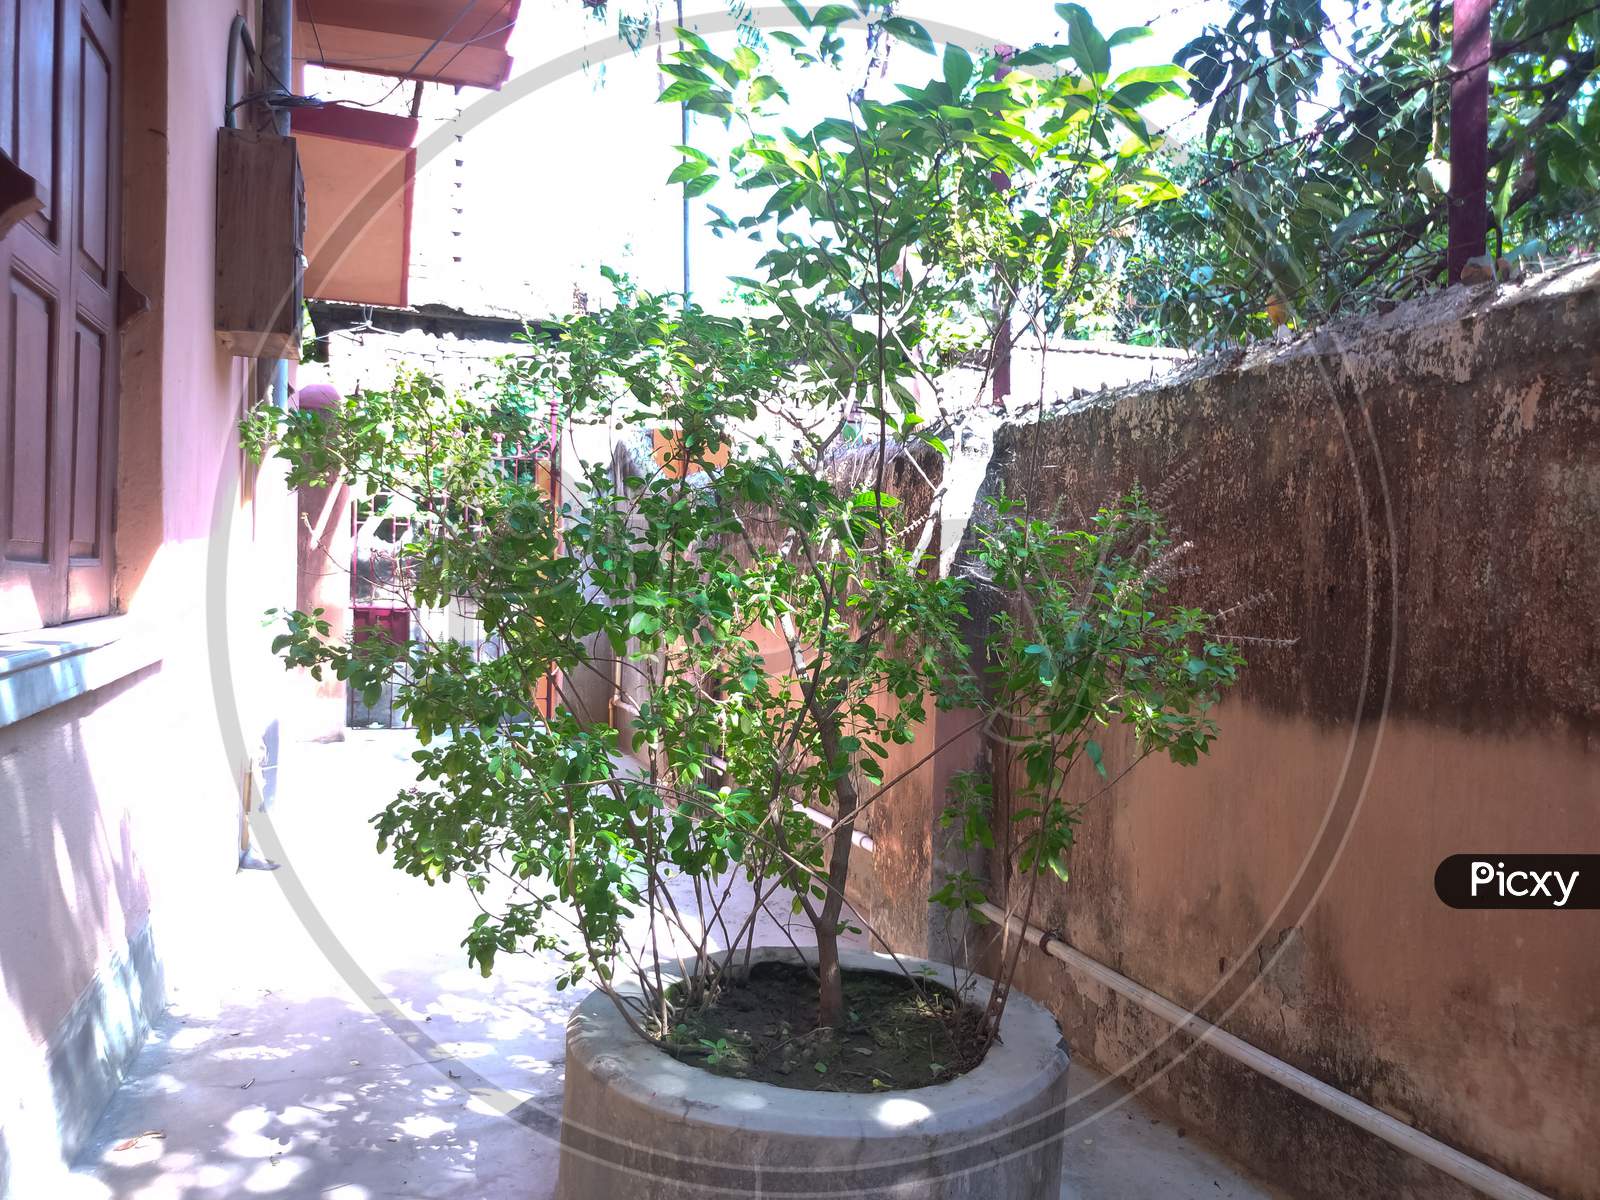 A Little Tree Outside In Building In Sunlight Area With Selective Focus, Selective Focus On Subject, Background Blur